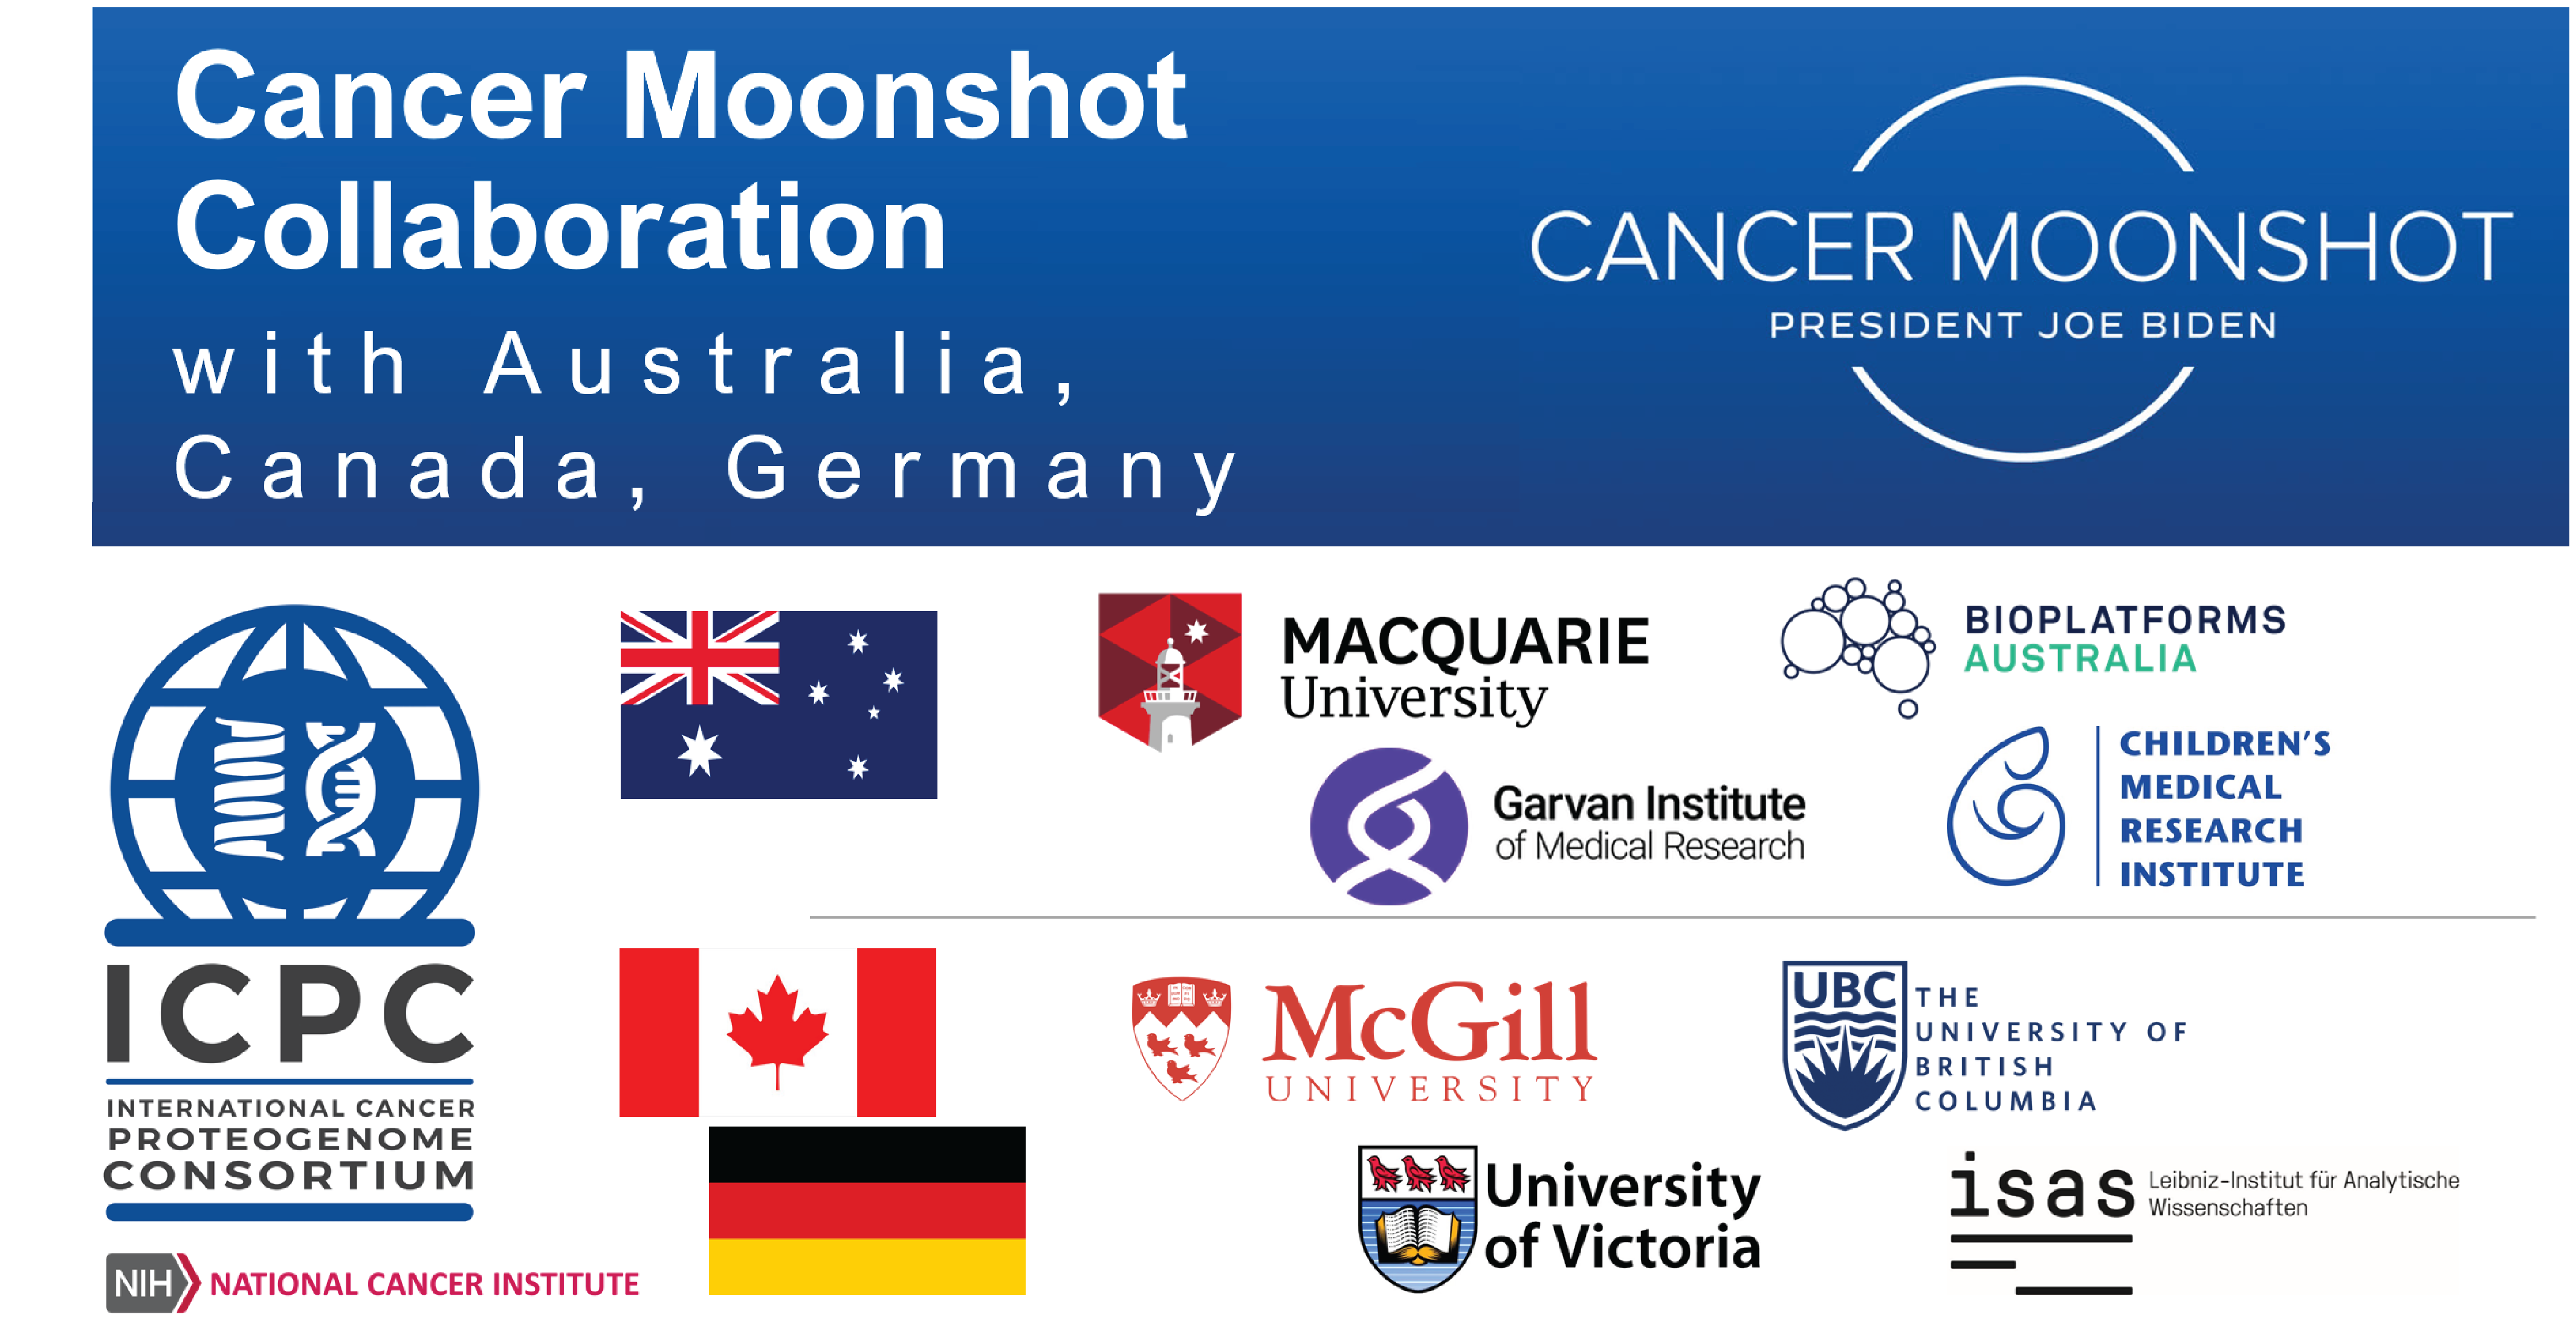 Cancer Moonshot Collaboration with Australia, Canada, Germany.